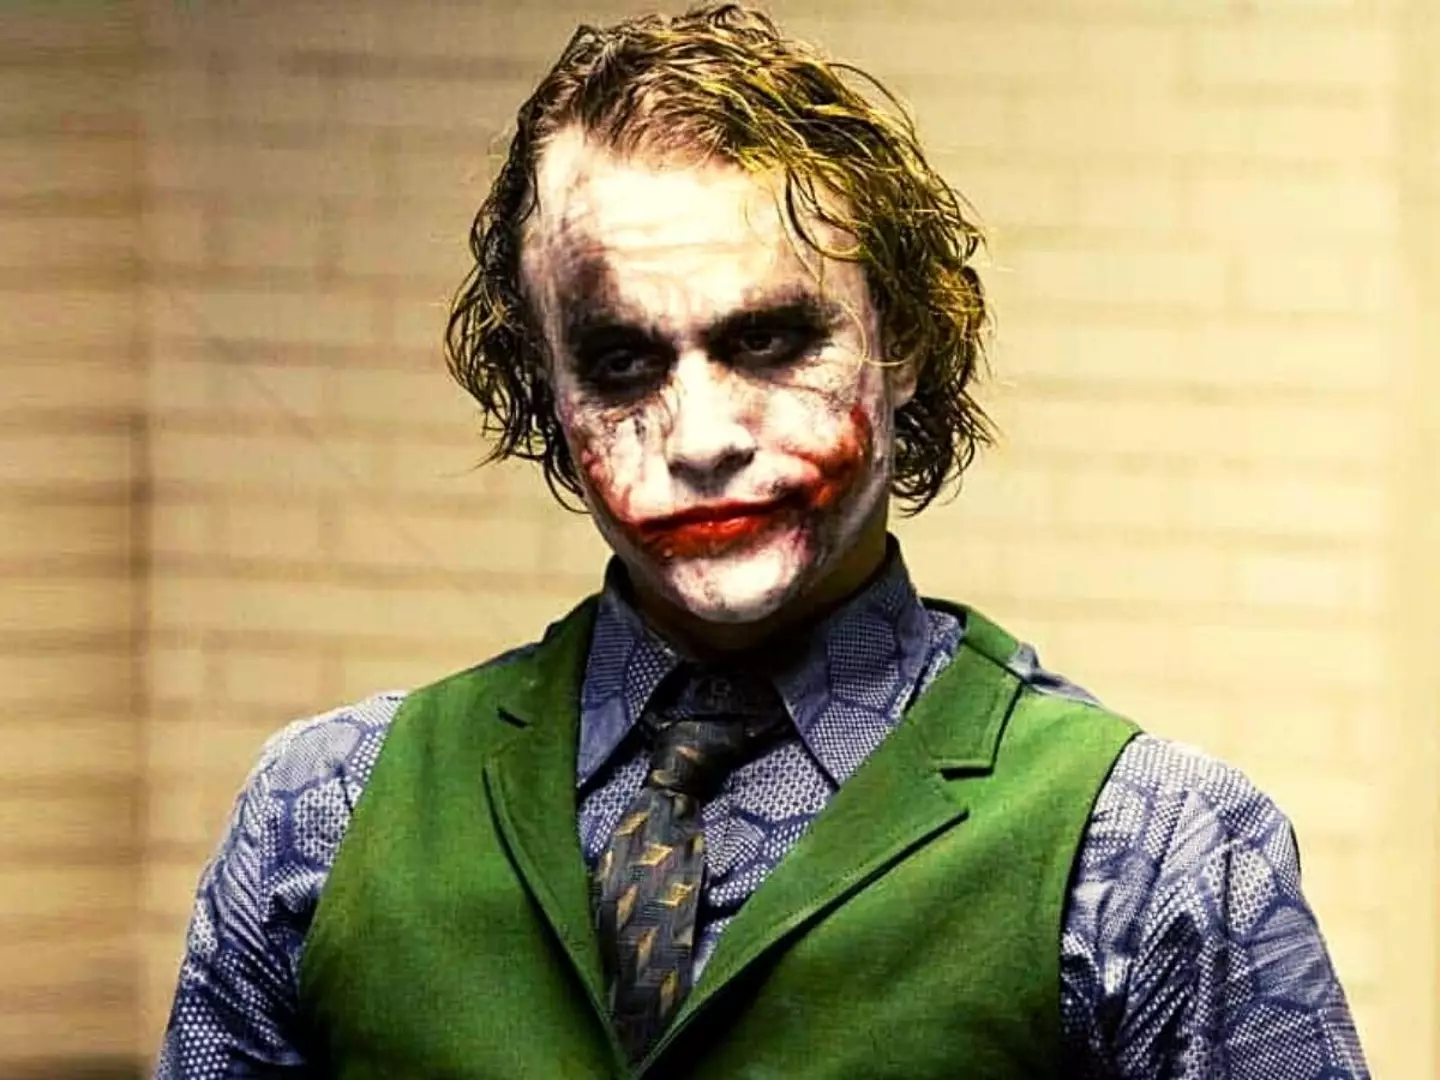 The Last of Us star Bella Ramsey has opened up on their desire to play the 'complex' Joker for their next role.